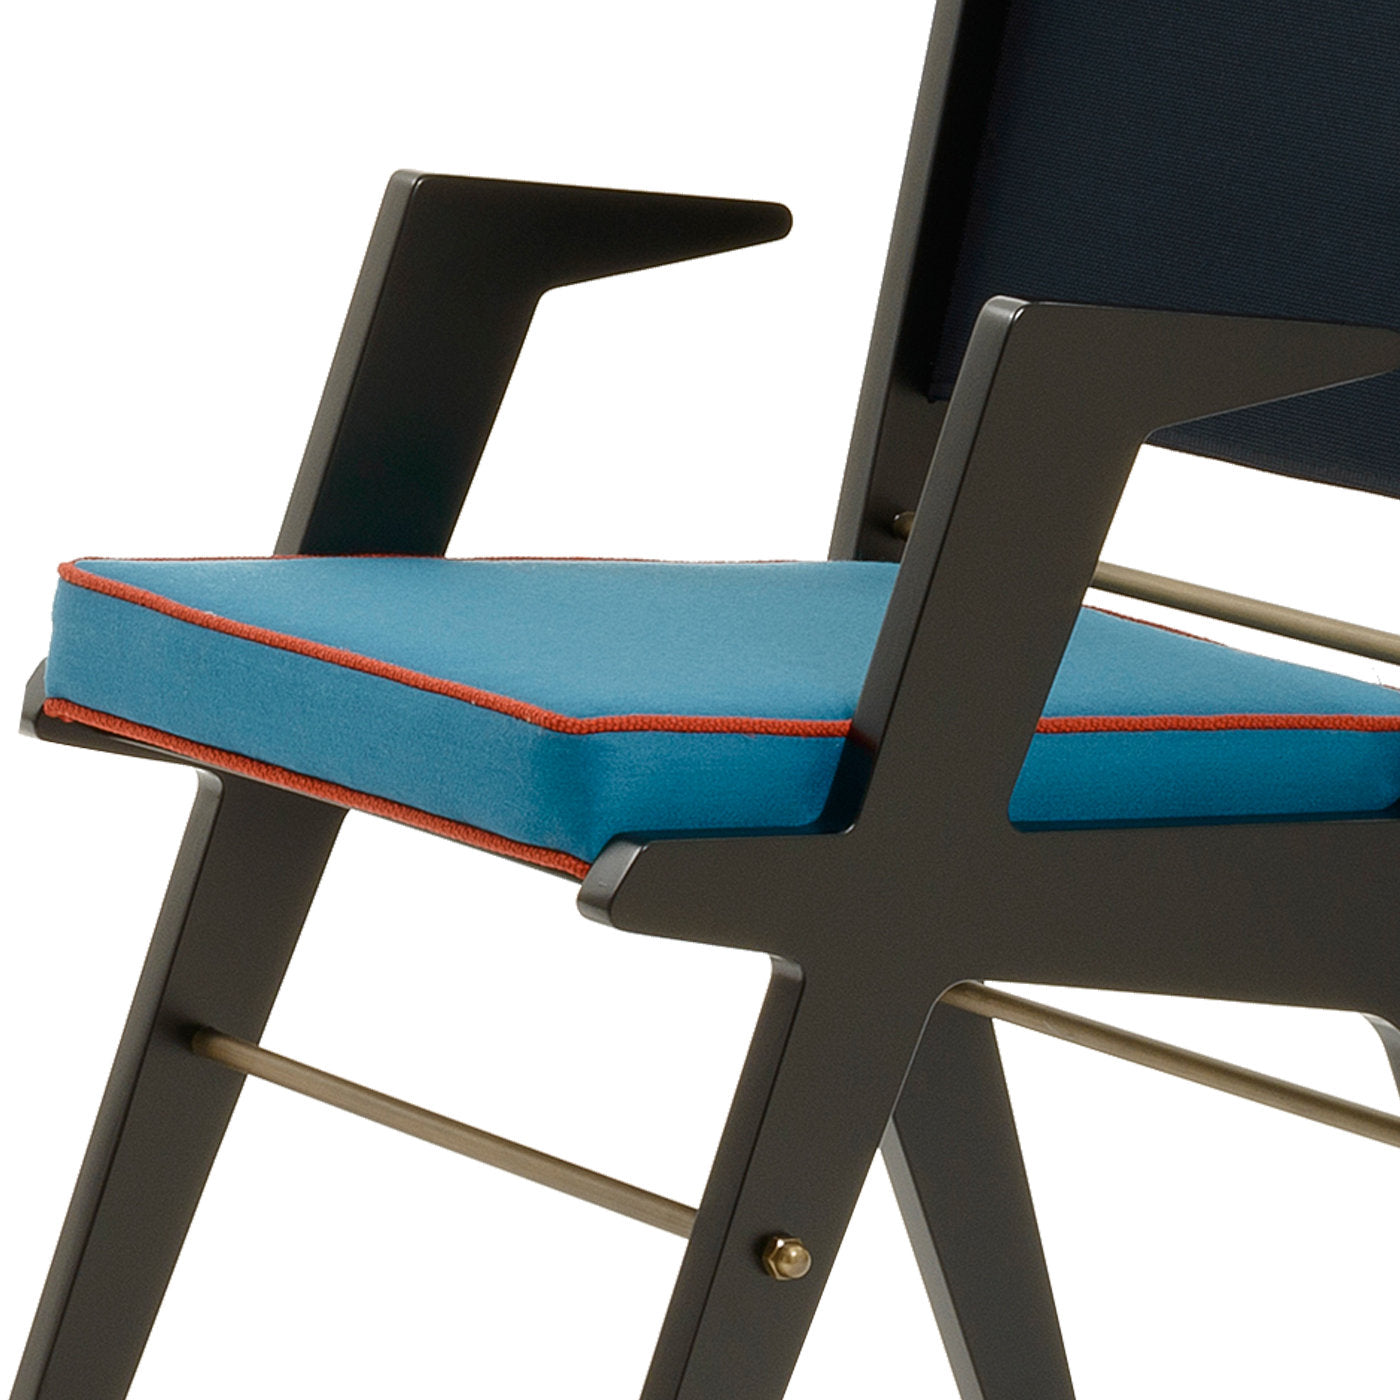 Colette Red and Blue Chair - Alternative view 2